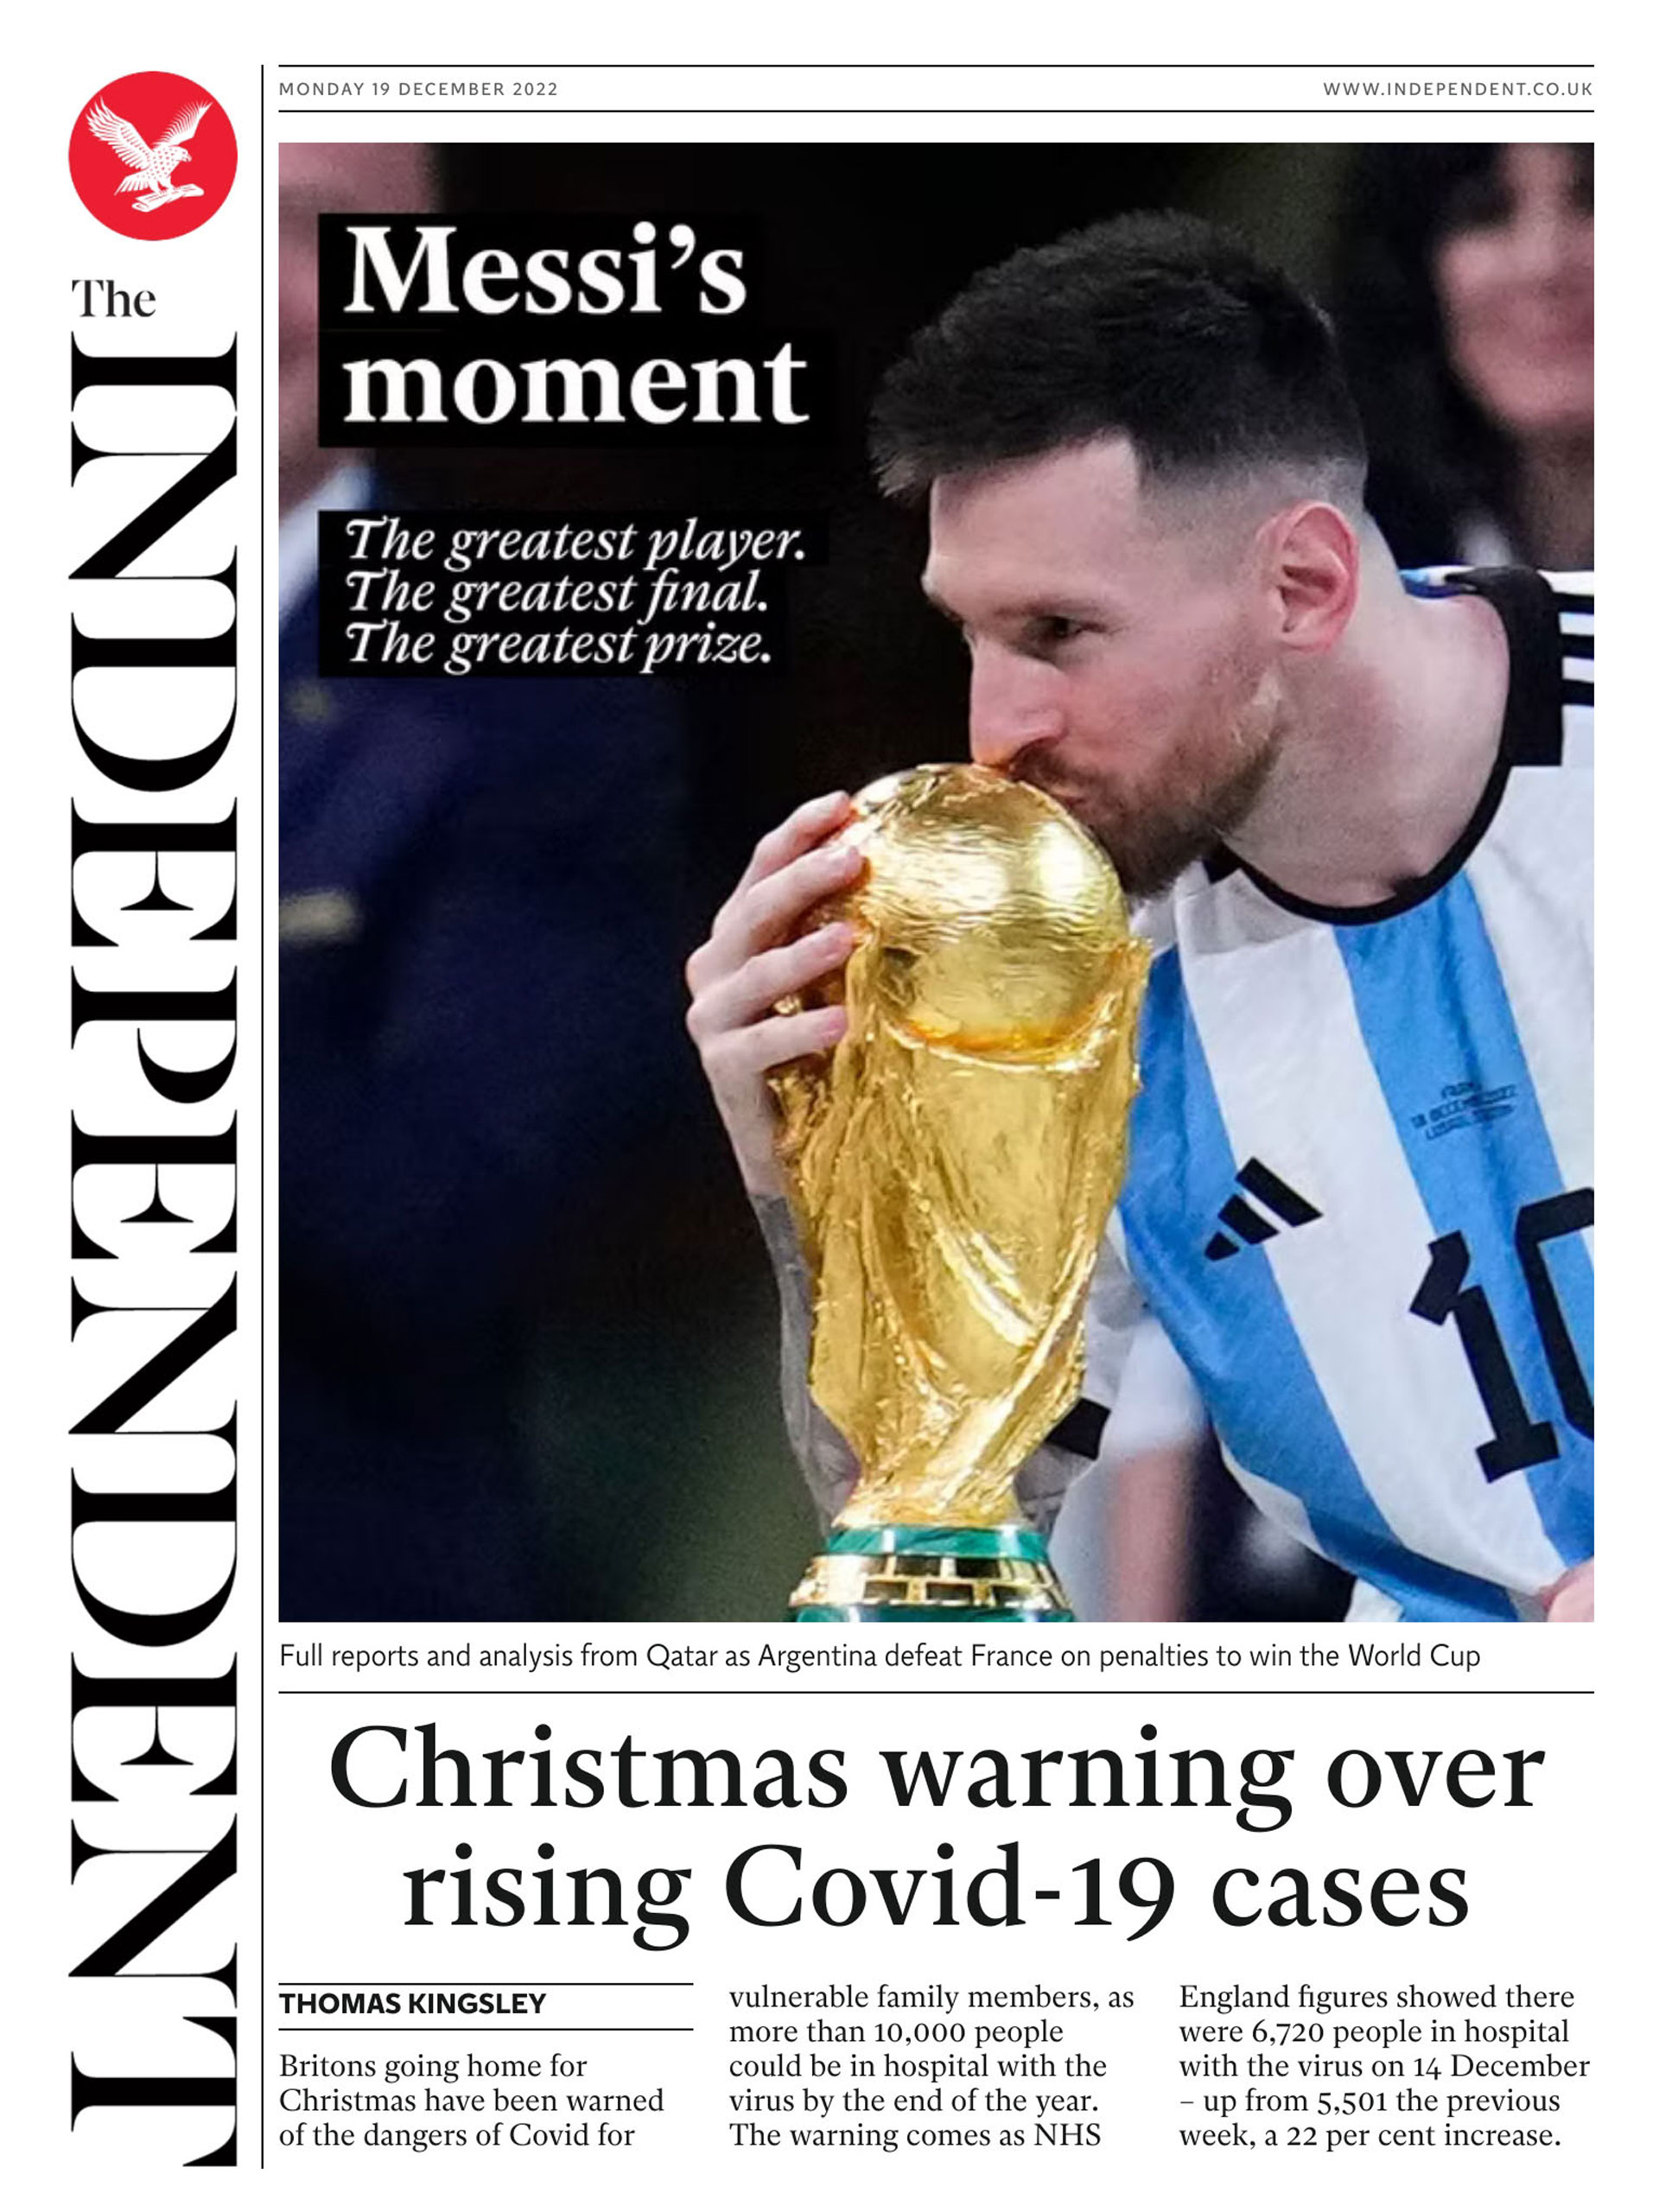 Lionel Messi won his first World Cup in his second final in a World Cup and this was reflected in The Independent